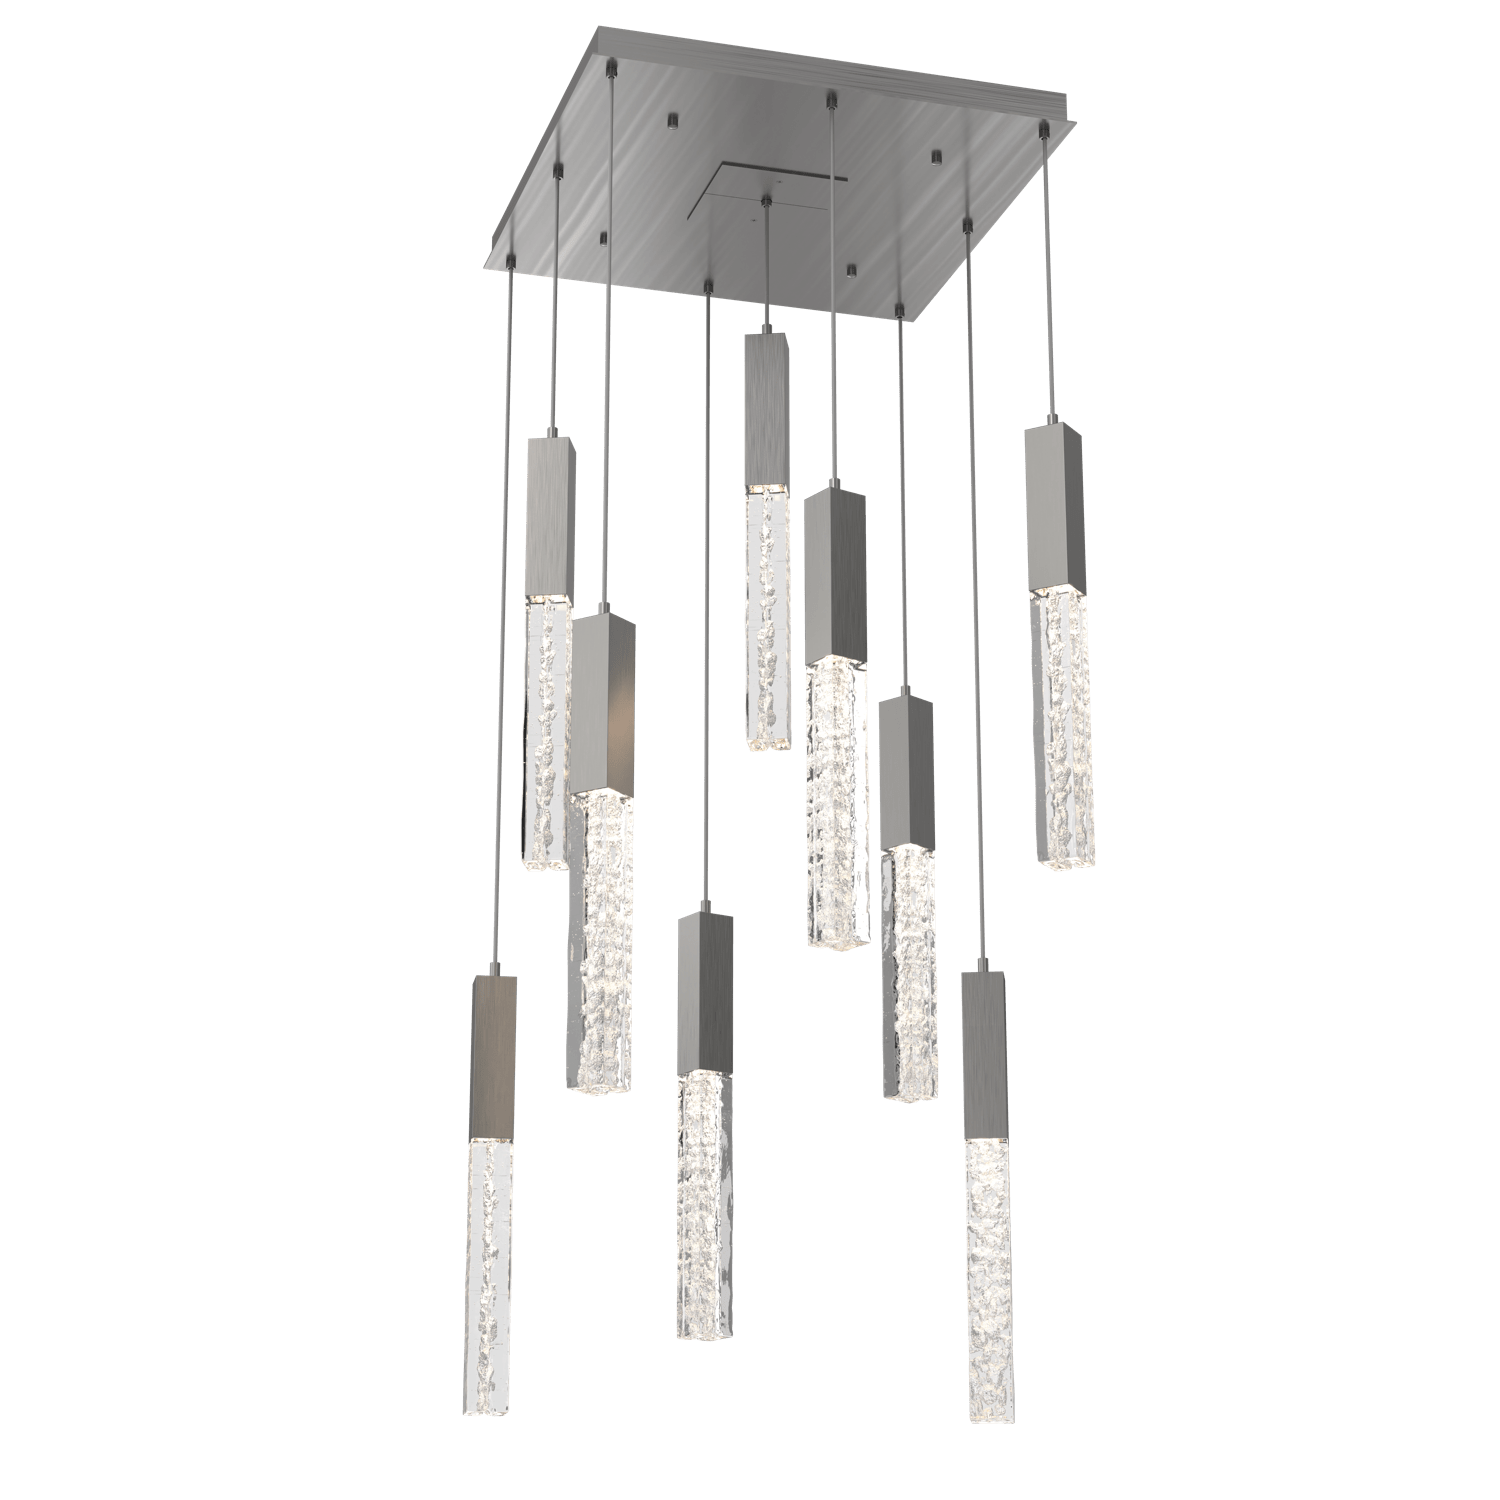 CHB0060-09-SN-GC-Hammerton-Studio-Axis-9-Light-Pendant-Chandelier-with-Satin-Nickel-finish-and-clear-cast-glass-and-LED-lamping